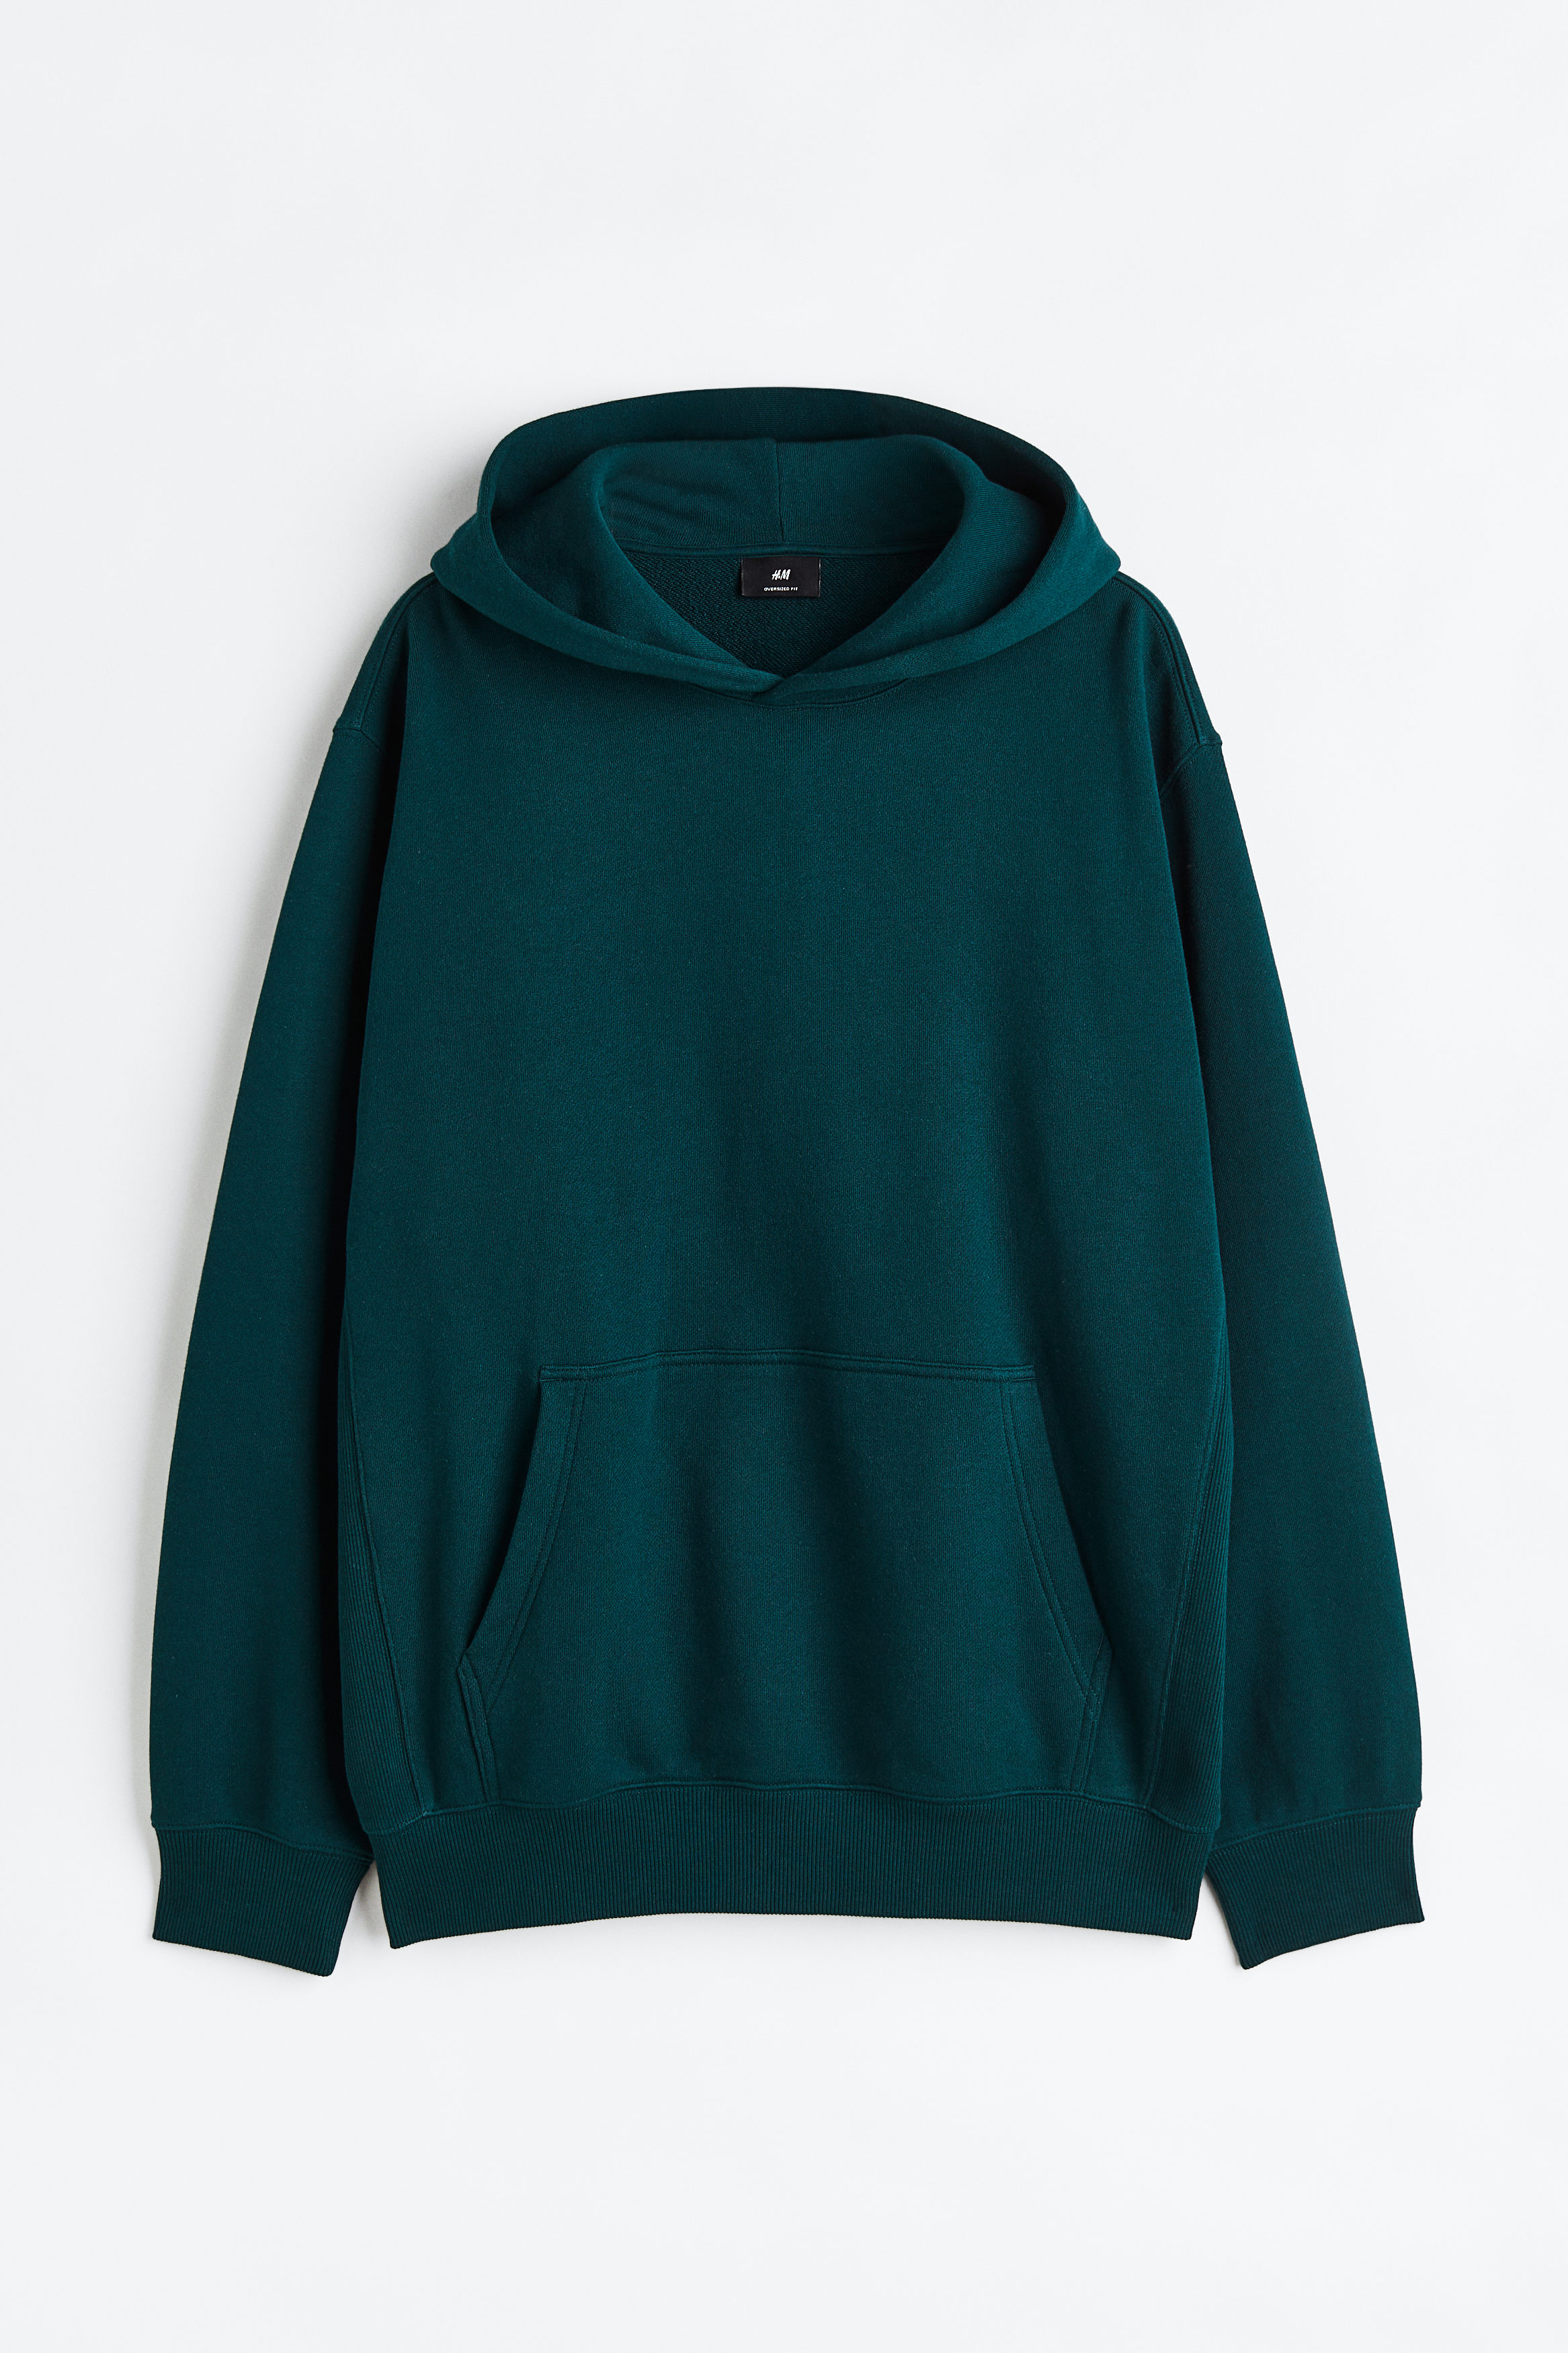 Oversized Fit Cotton hoodie - Forest green - Men | H&M Egypt